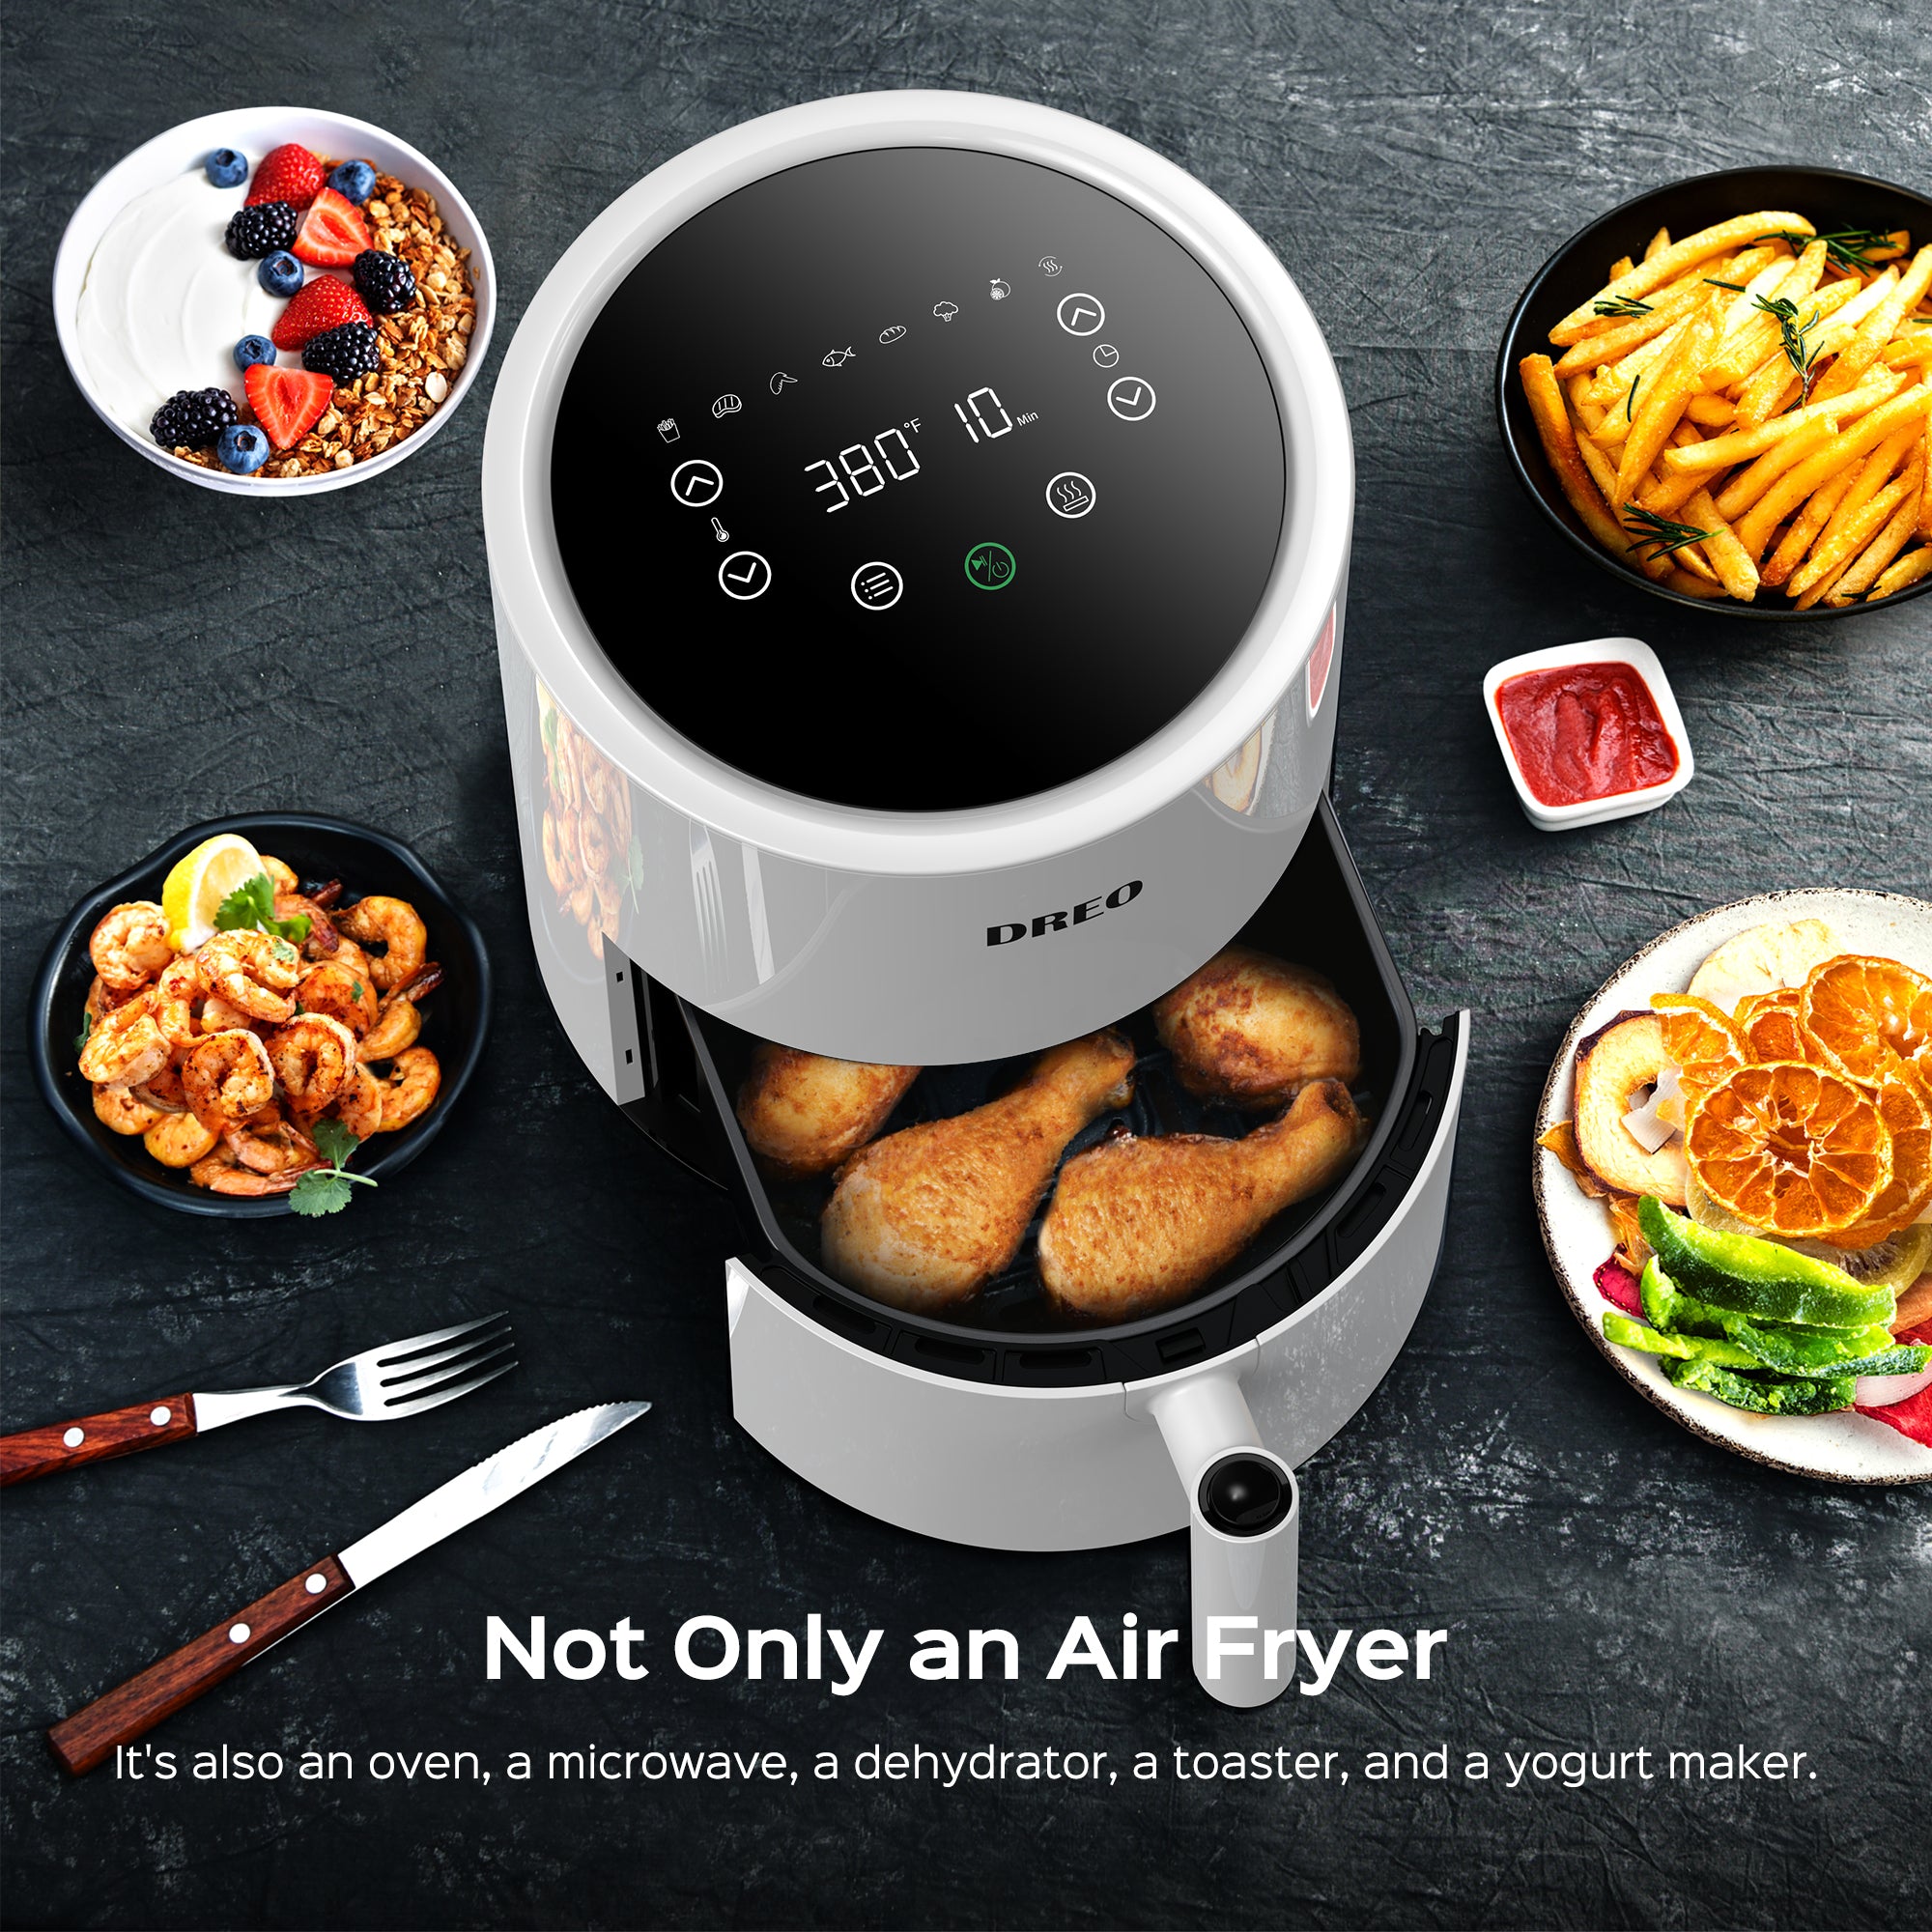 Dreo Air Fryer - 100℉ to 450℉, 4 Quart Hot Oven Cooker with 50 Recipes